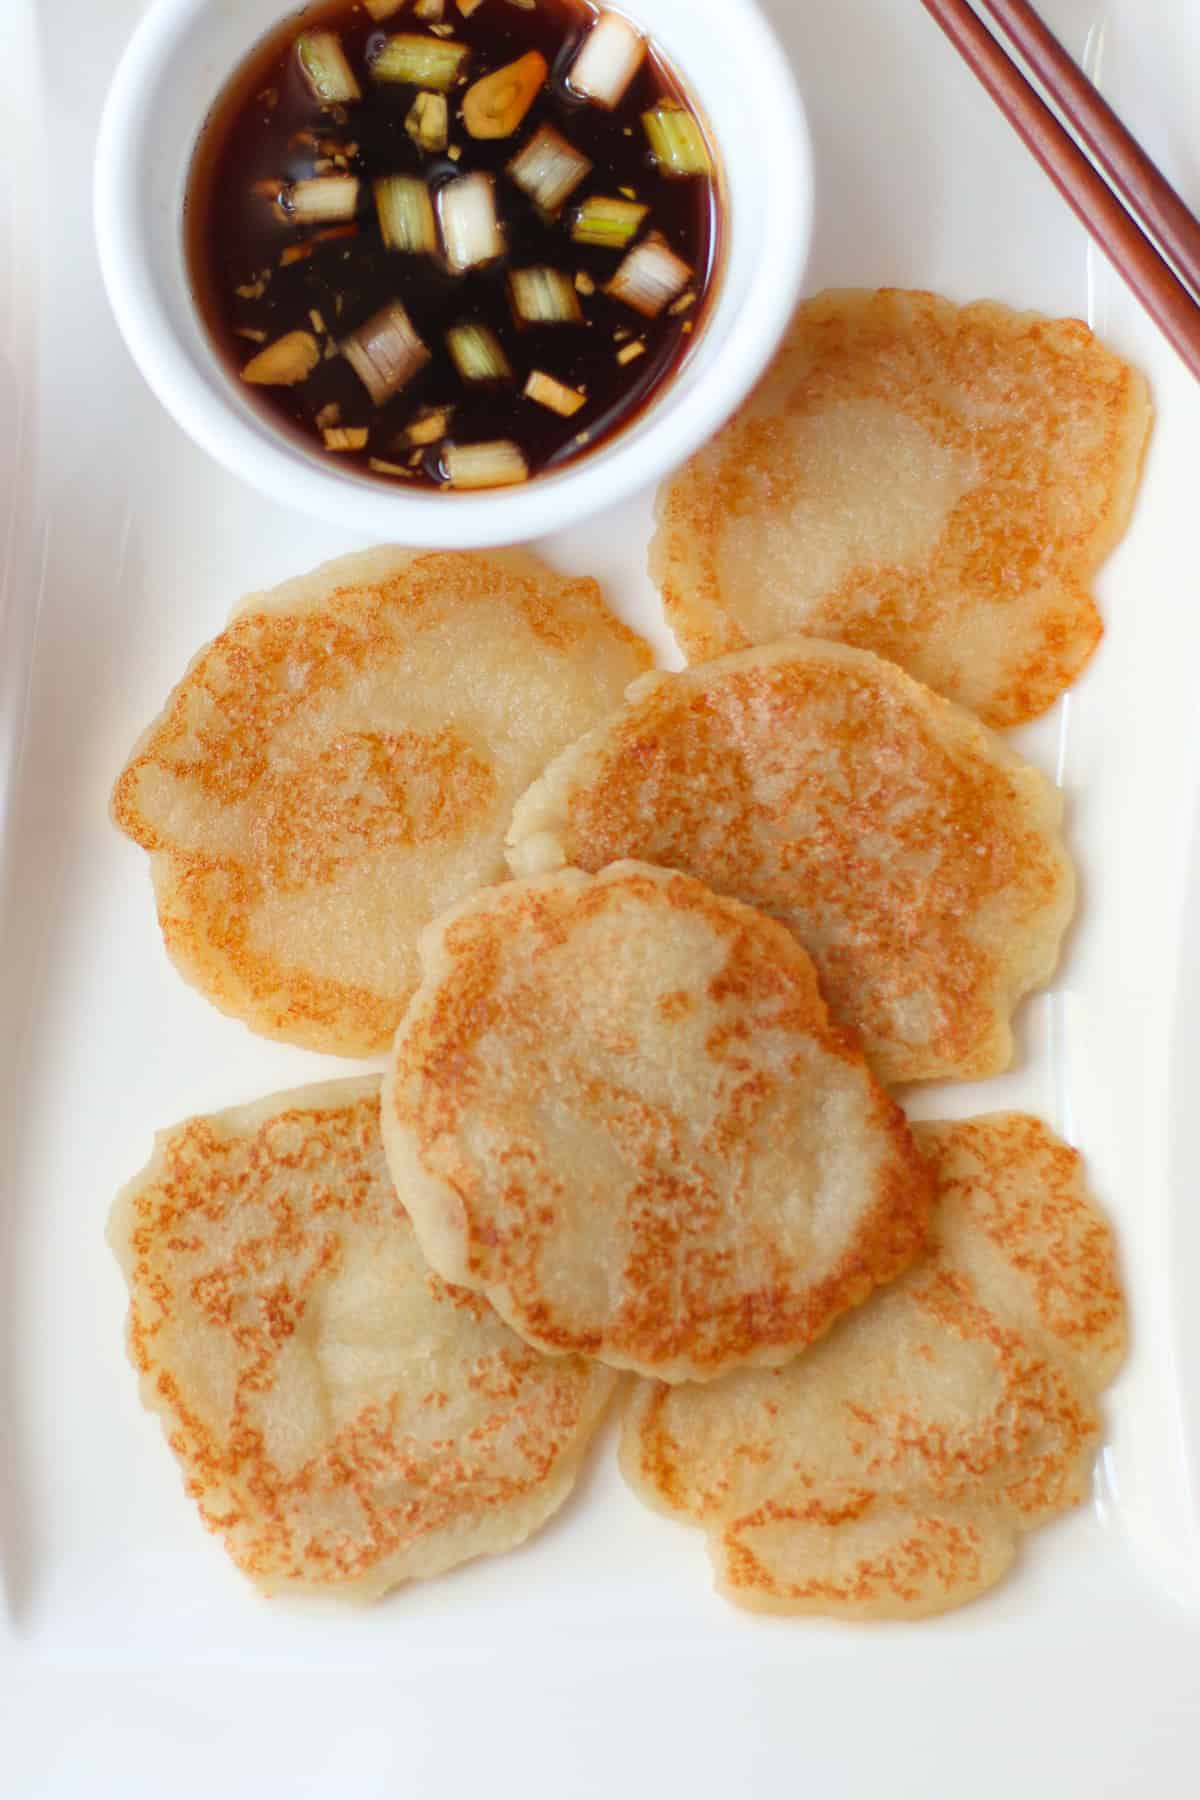 Golden brown gamjajeon with dipping sauce on a white plate.